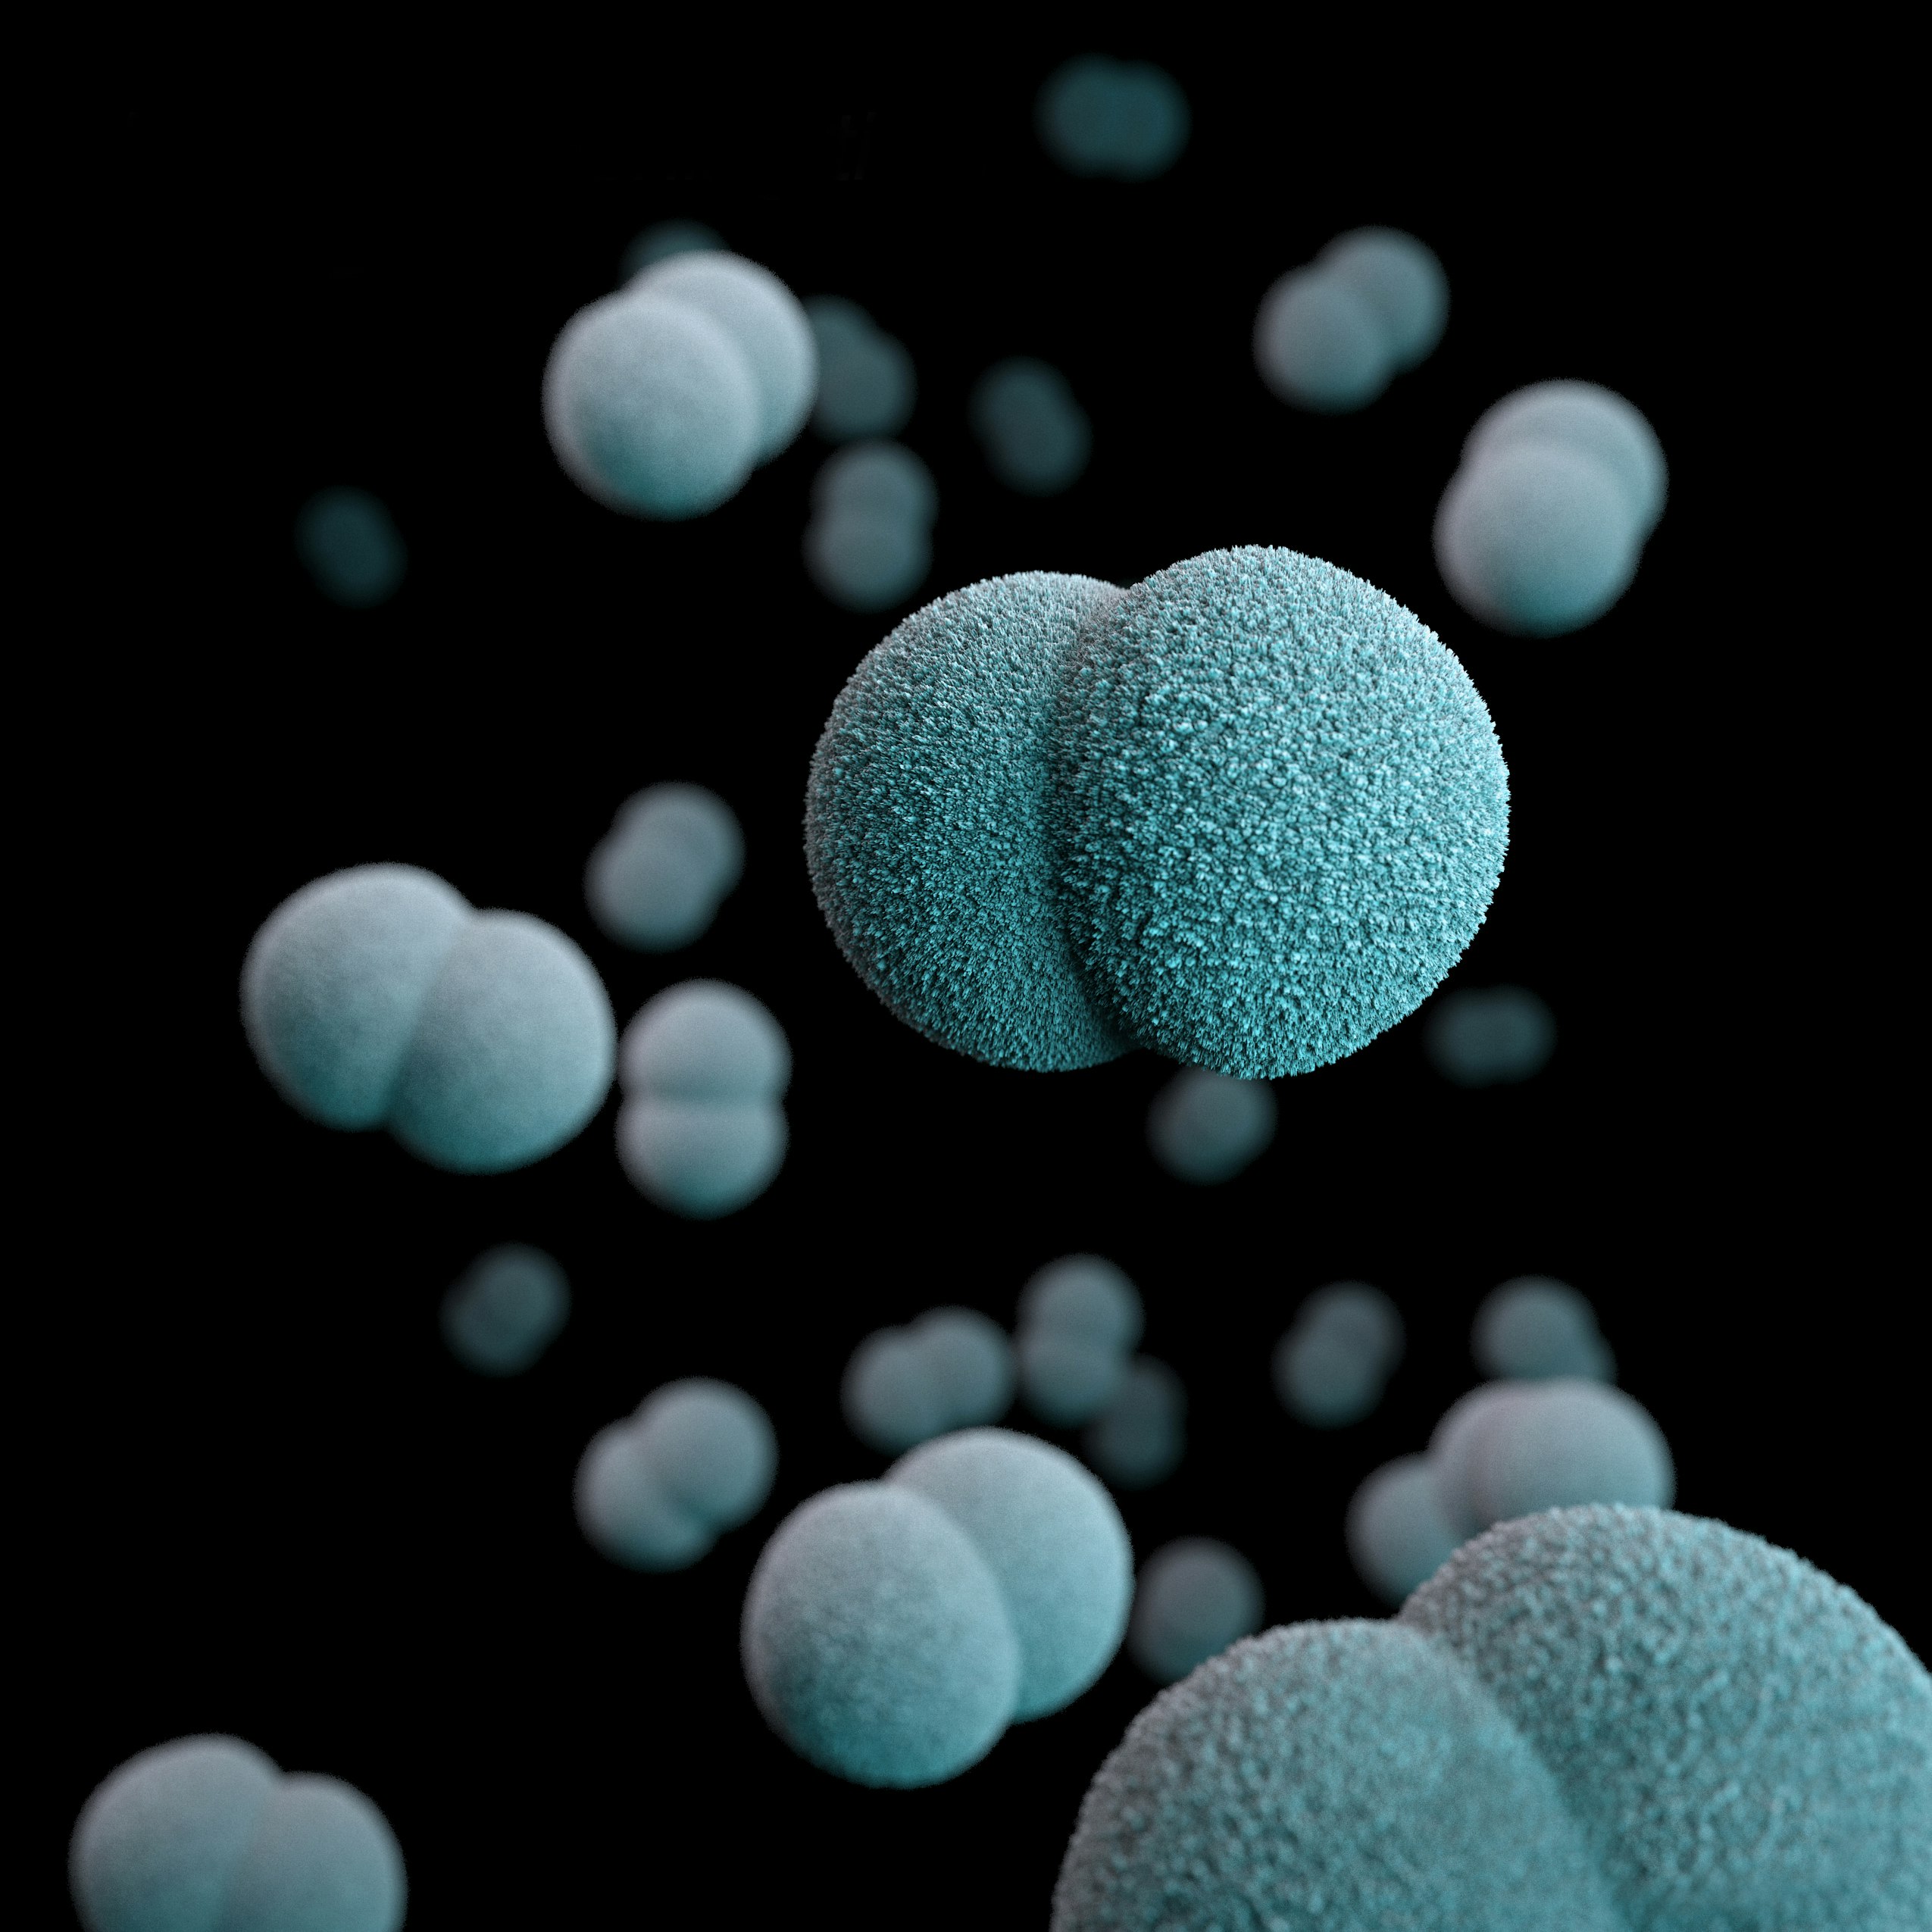 This illustration depicted a three-dimensional (3D), computer-generated image, of a number of diplococcal, Gram-negative, Neisseria meningitidis, bacteria. The artistic recreation was based upon scanning electron microscopic (SEM) imagery.